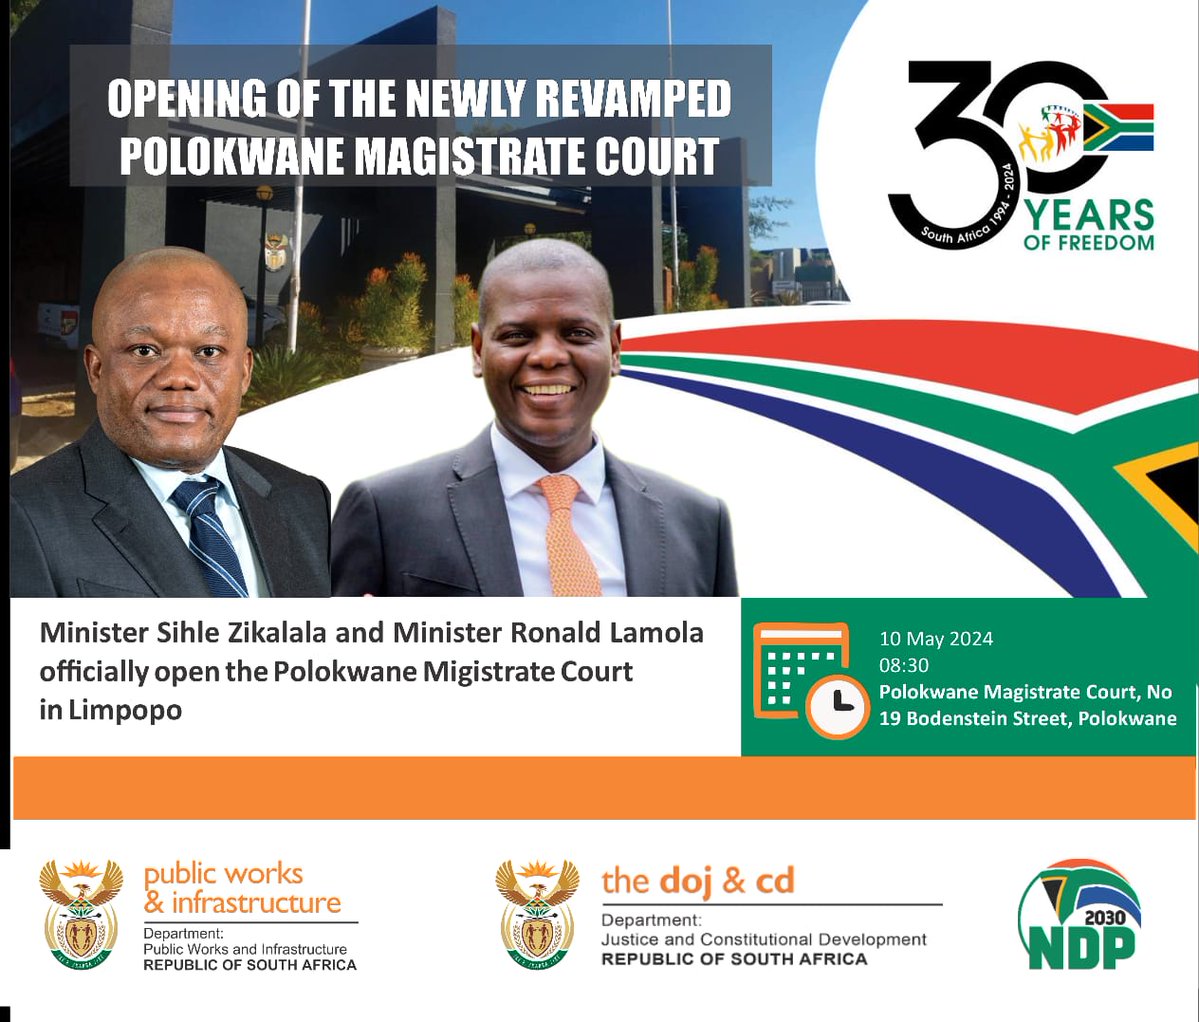 MINISTER RONALD LAMOLA AND MINISTER ZIKALALA TO OFFICIALLY OPEN THE POLOKWANE MAGISTRATES’ COURT